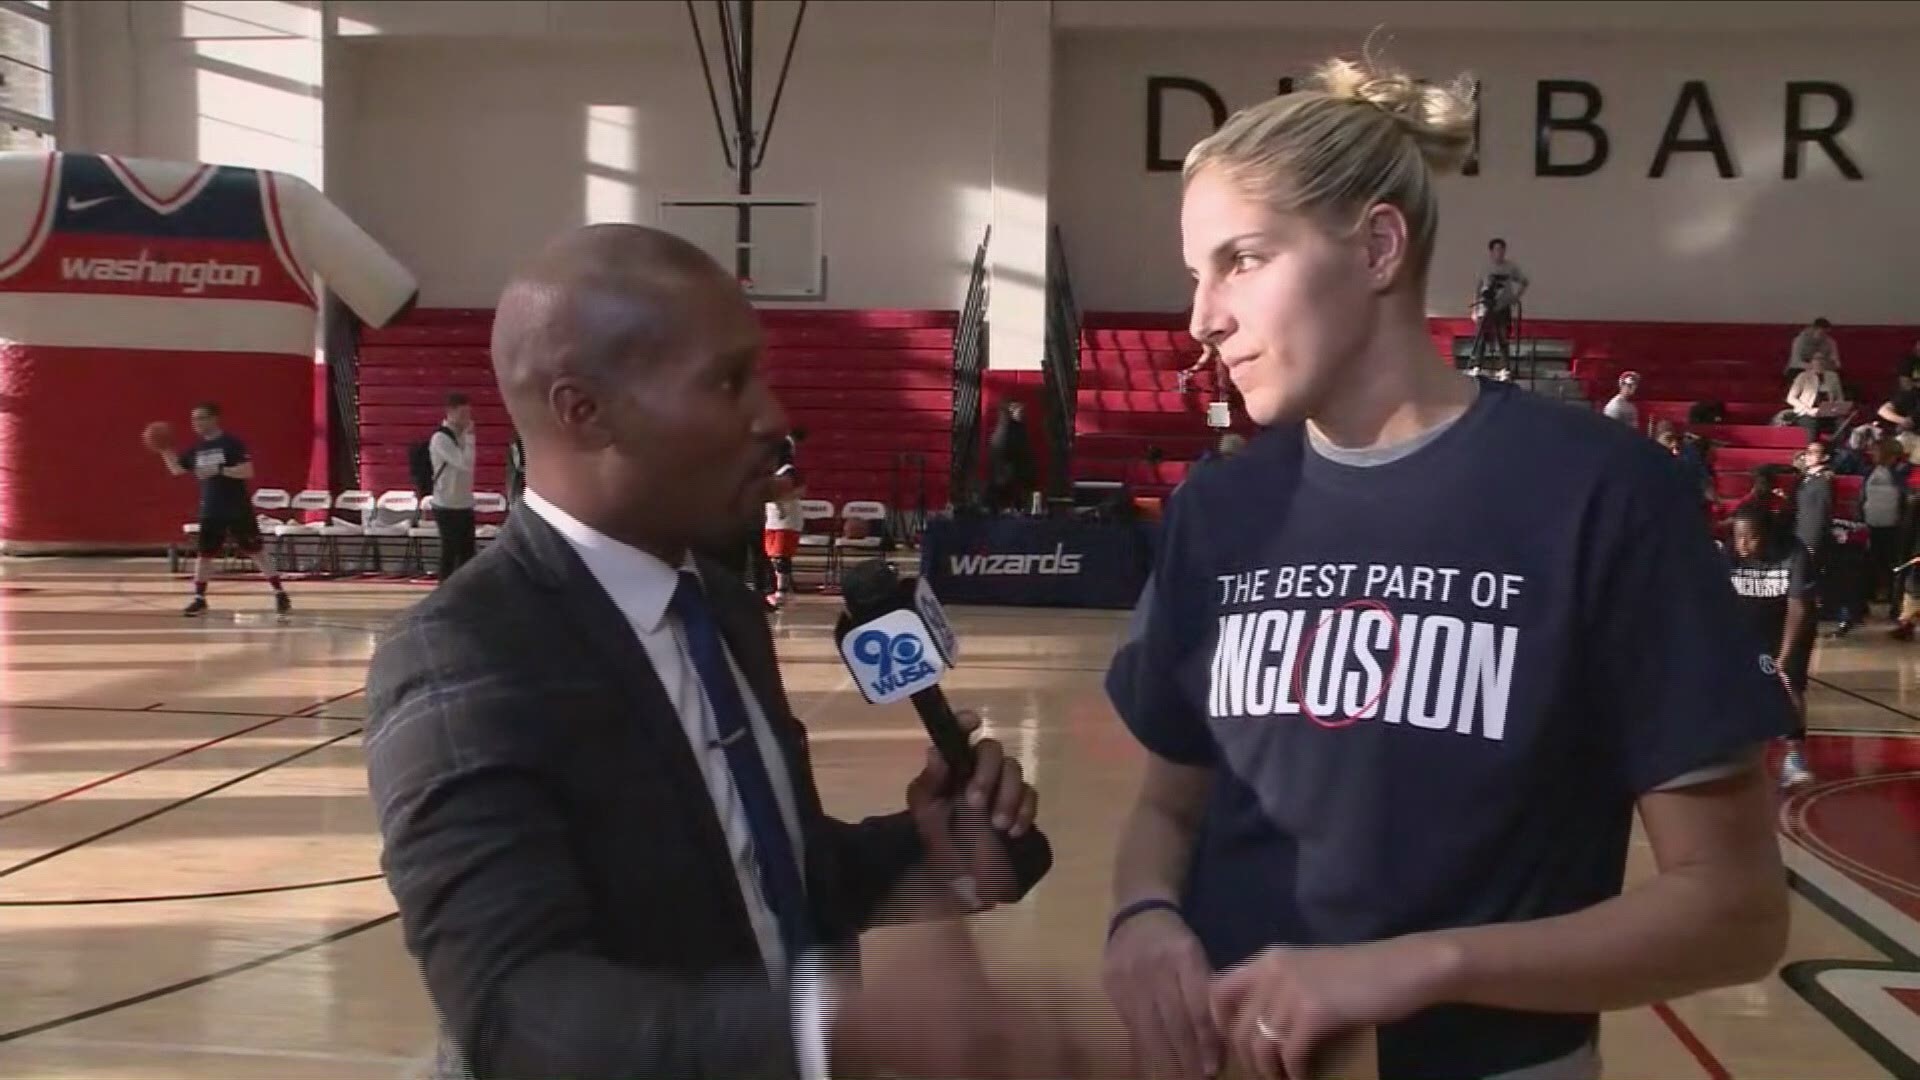 The Mystics championship parade is set for May 12, and Elena Delle Donne is excited for it!